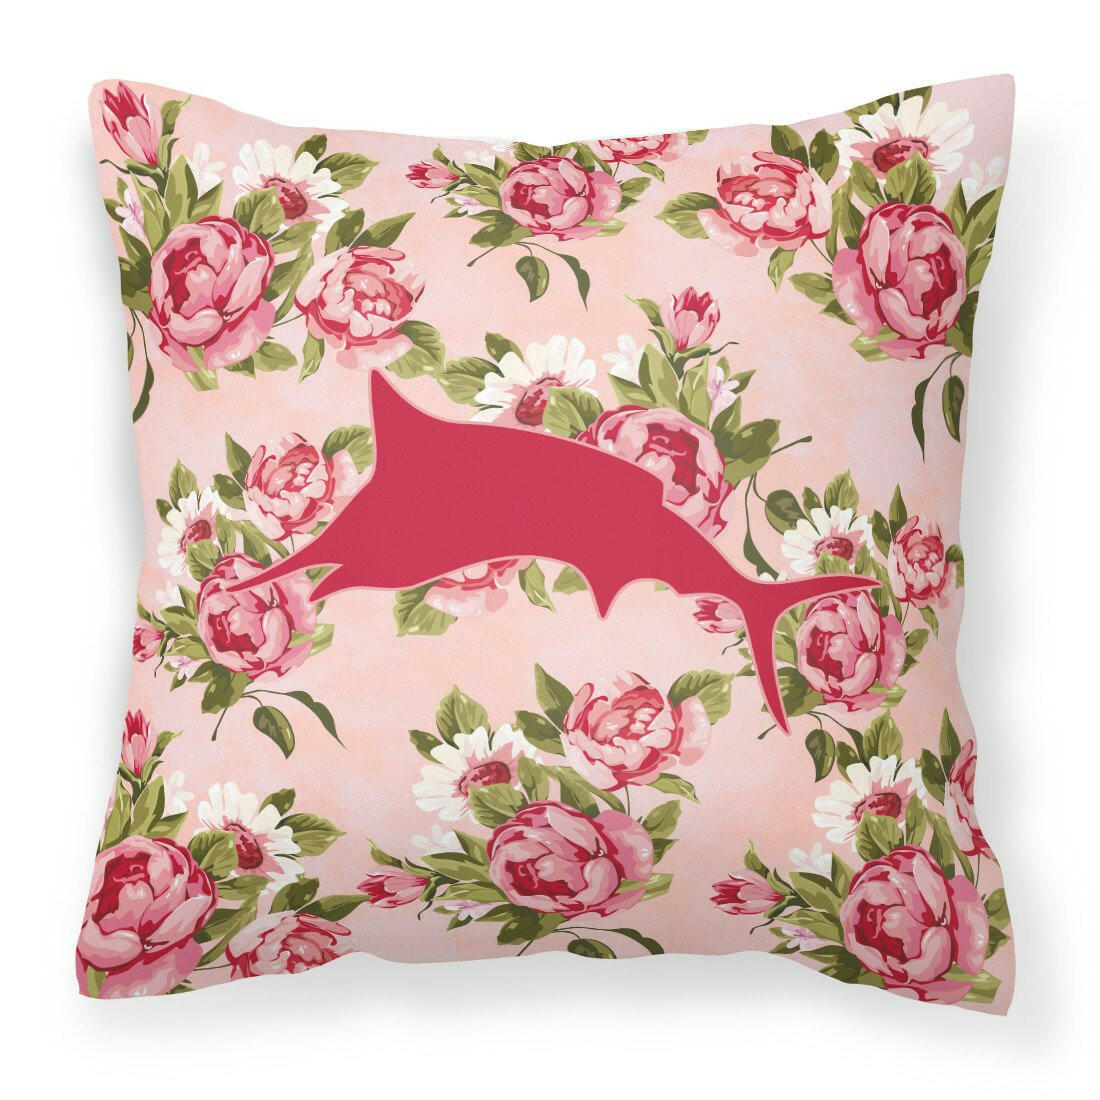 Fish - Marlin Shabby Chic Pink Roses  Fabric Decorative Pillow BB1026-RS-PK-PW1414 - the-store.com